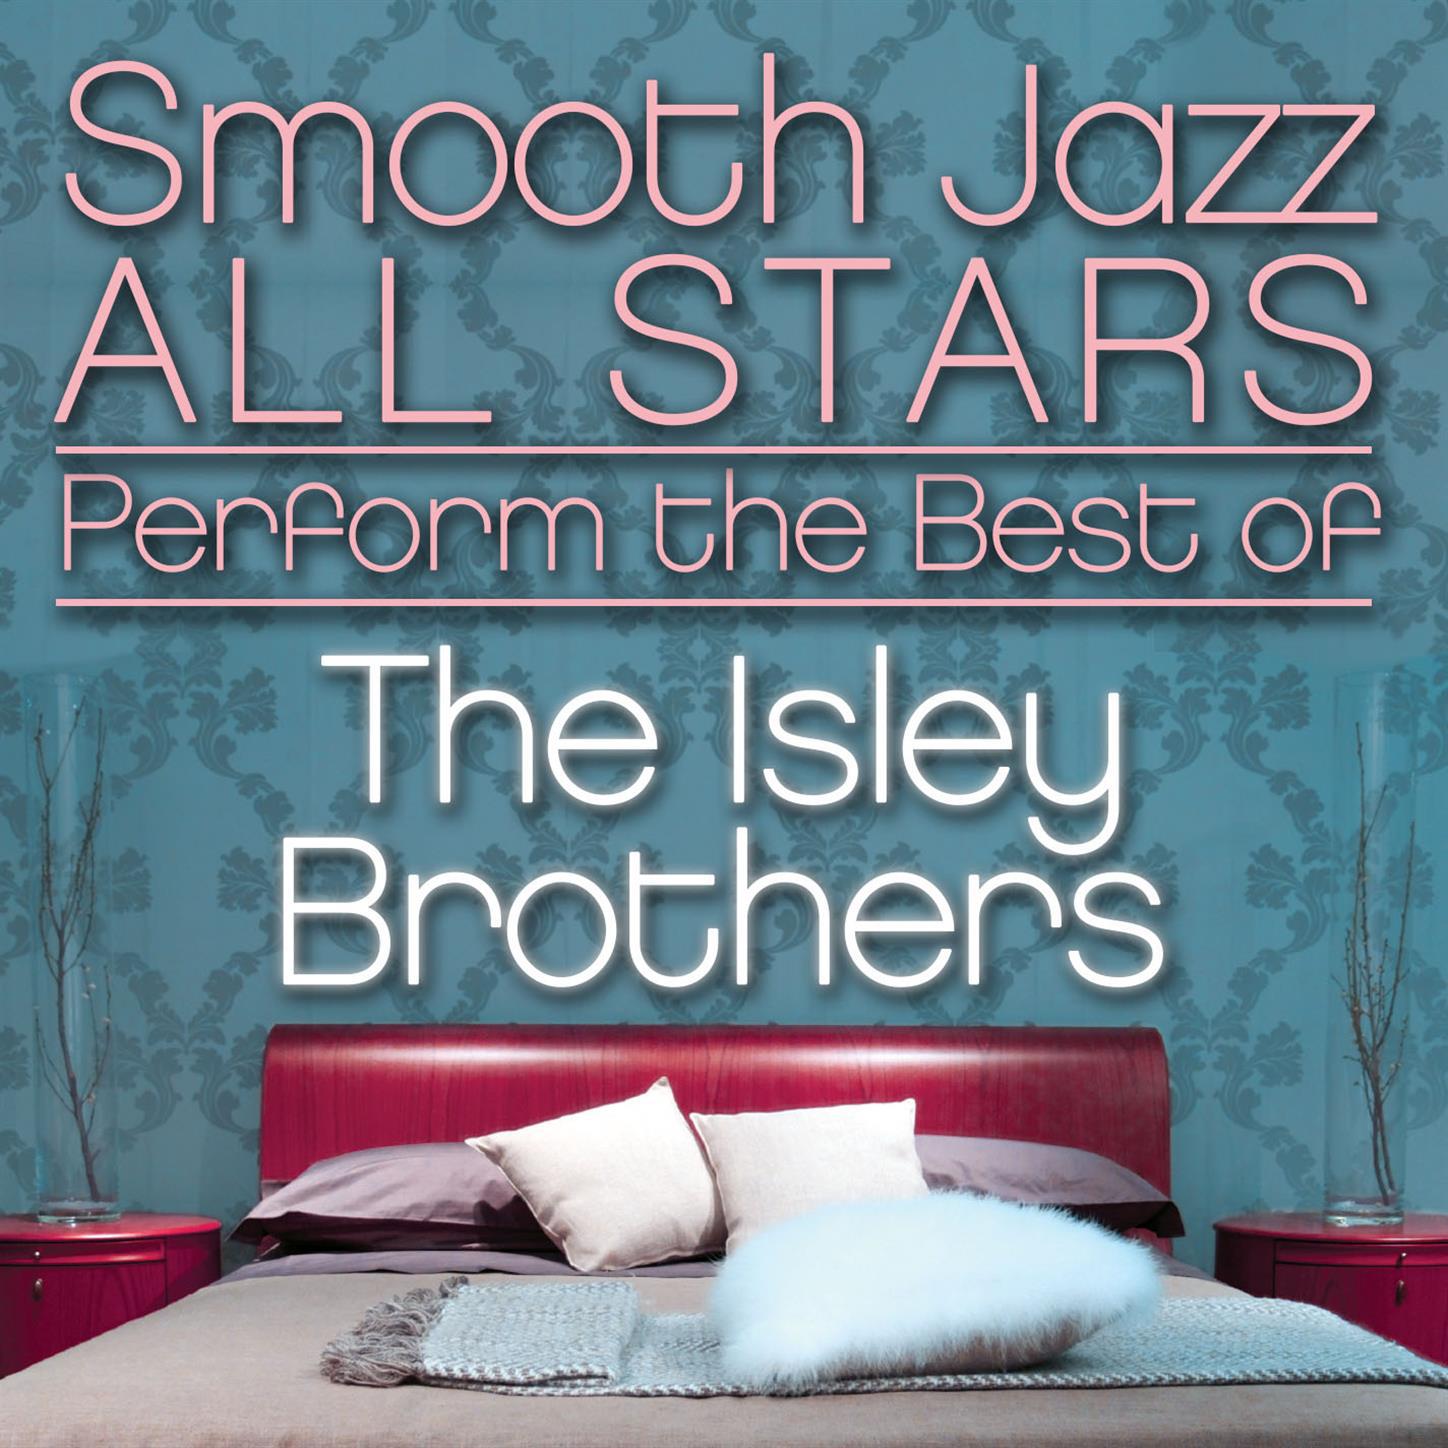 Smooth Jazz All Stars Perform the Best of the Isley Brothers